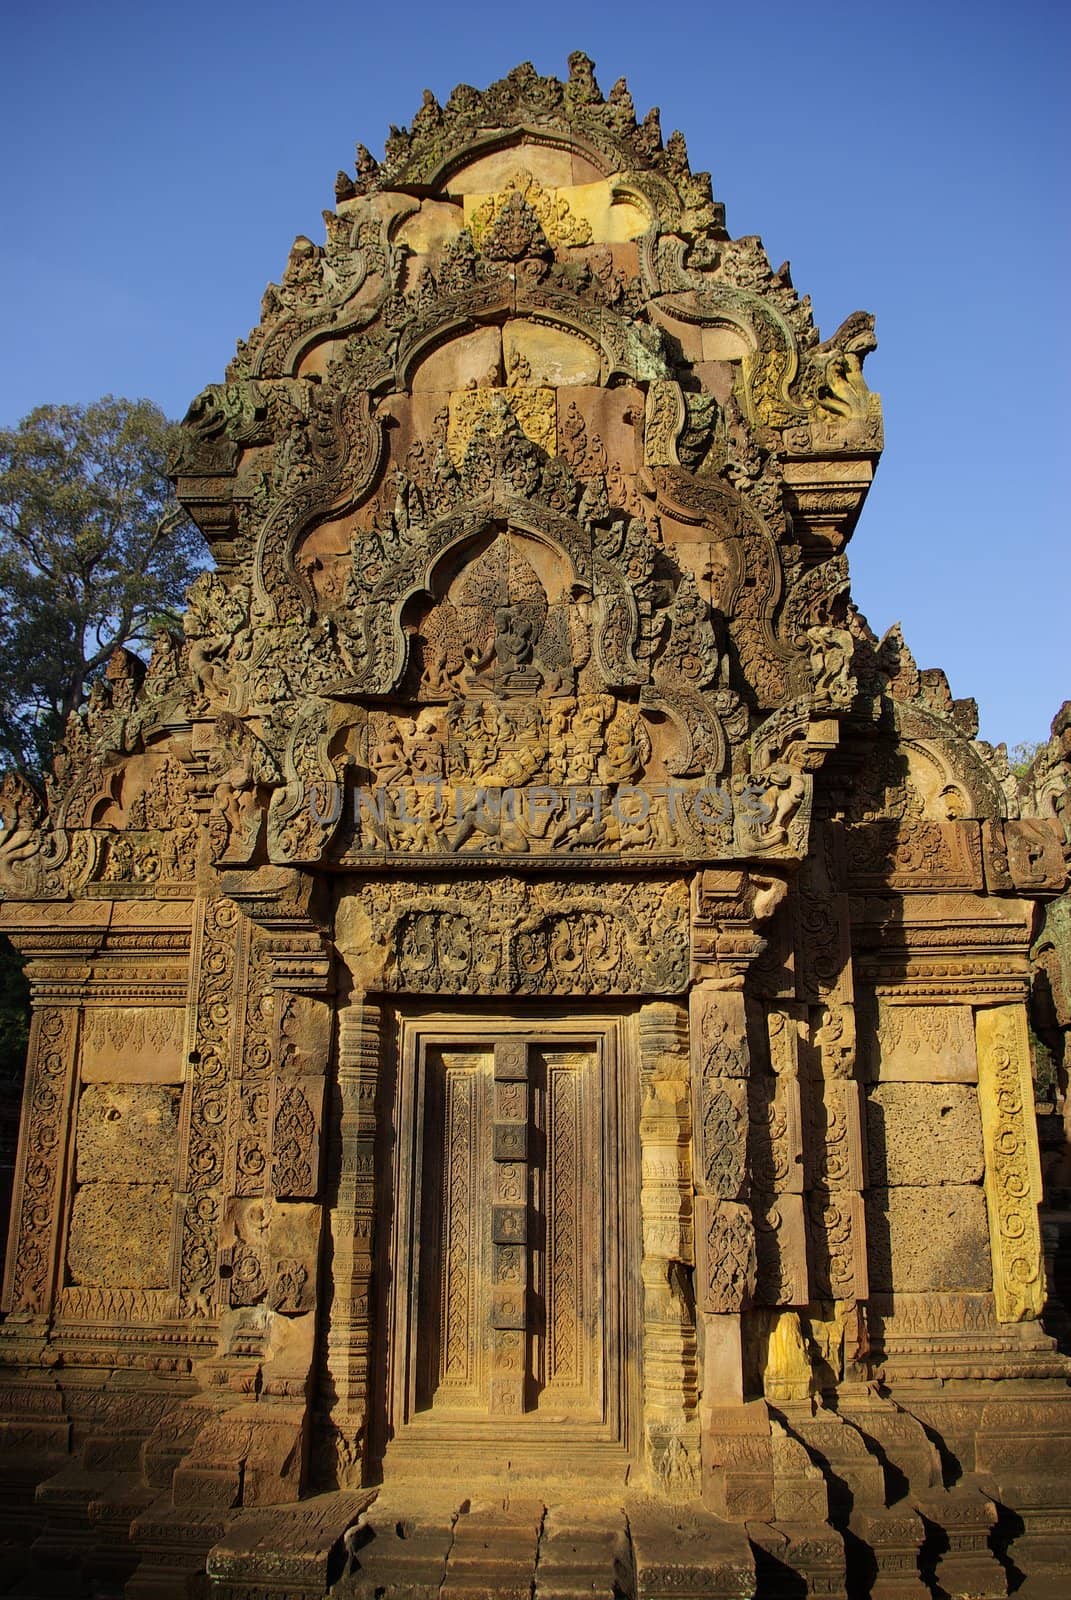 View of a stone door in the Prasat Kravan temple in Angkor by shkyo30